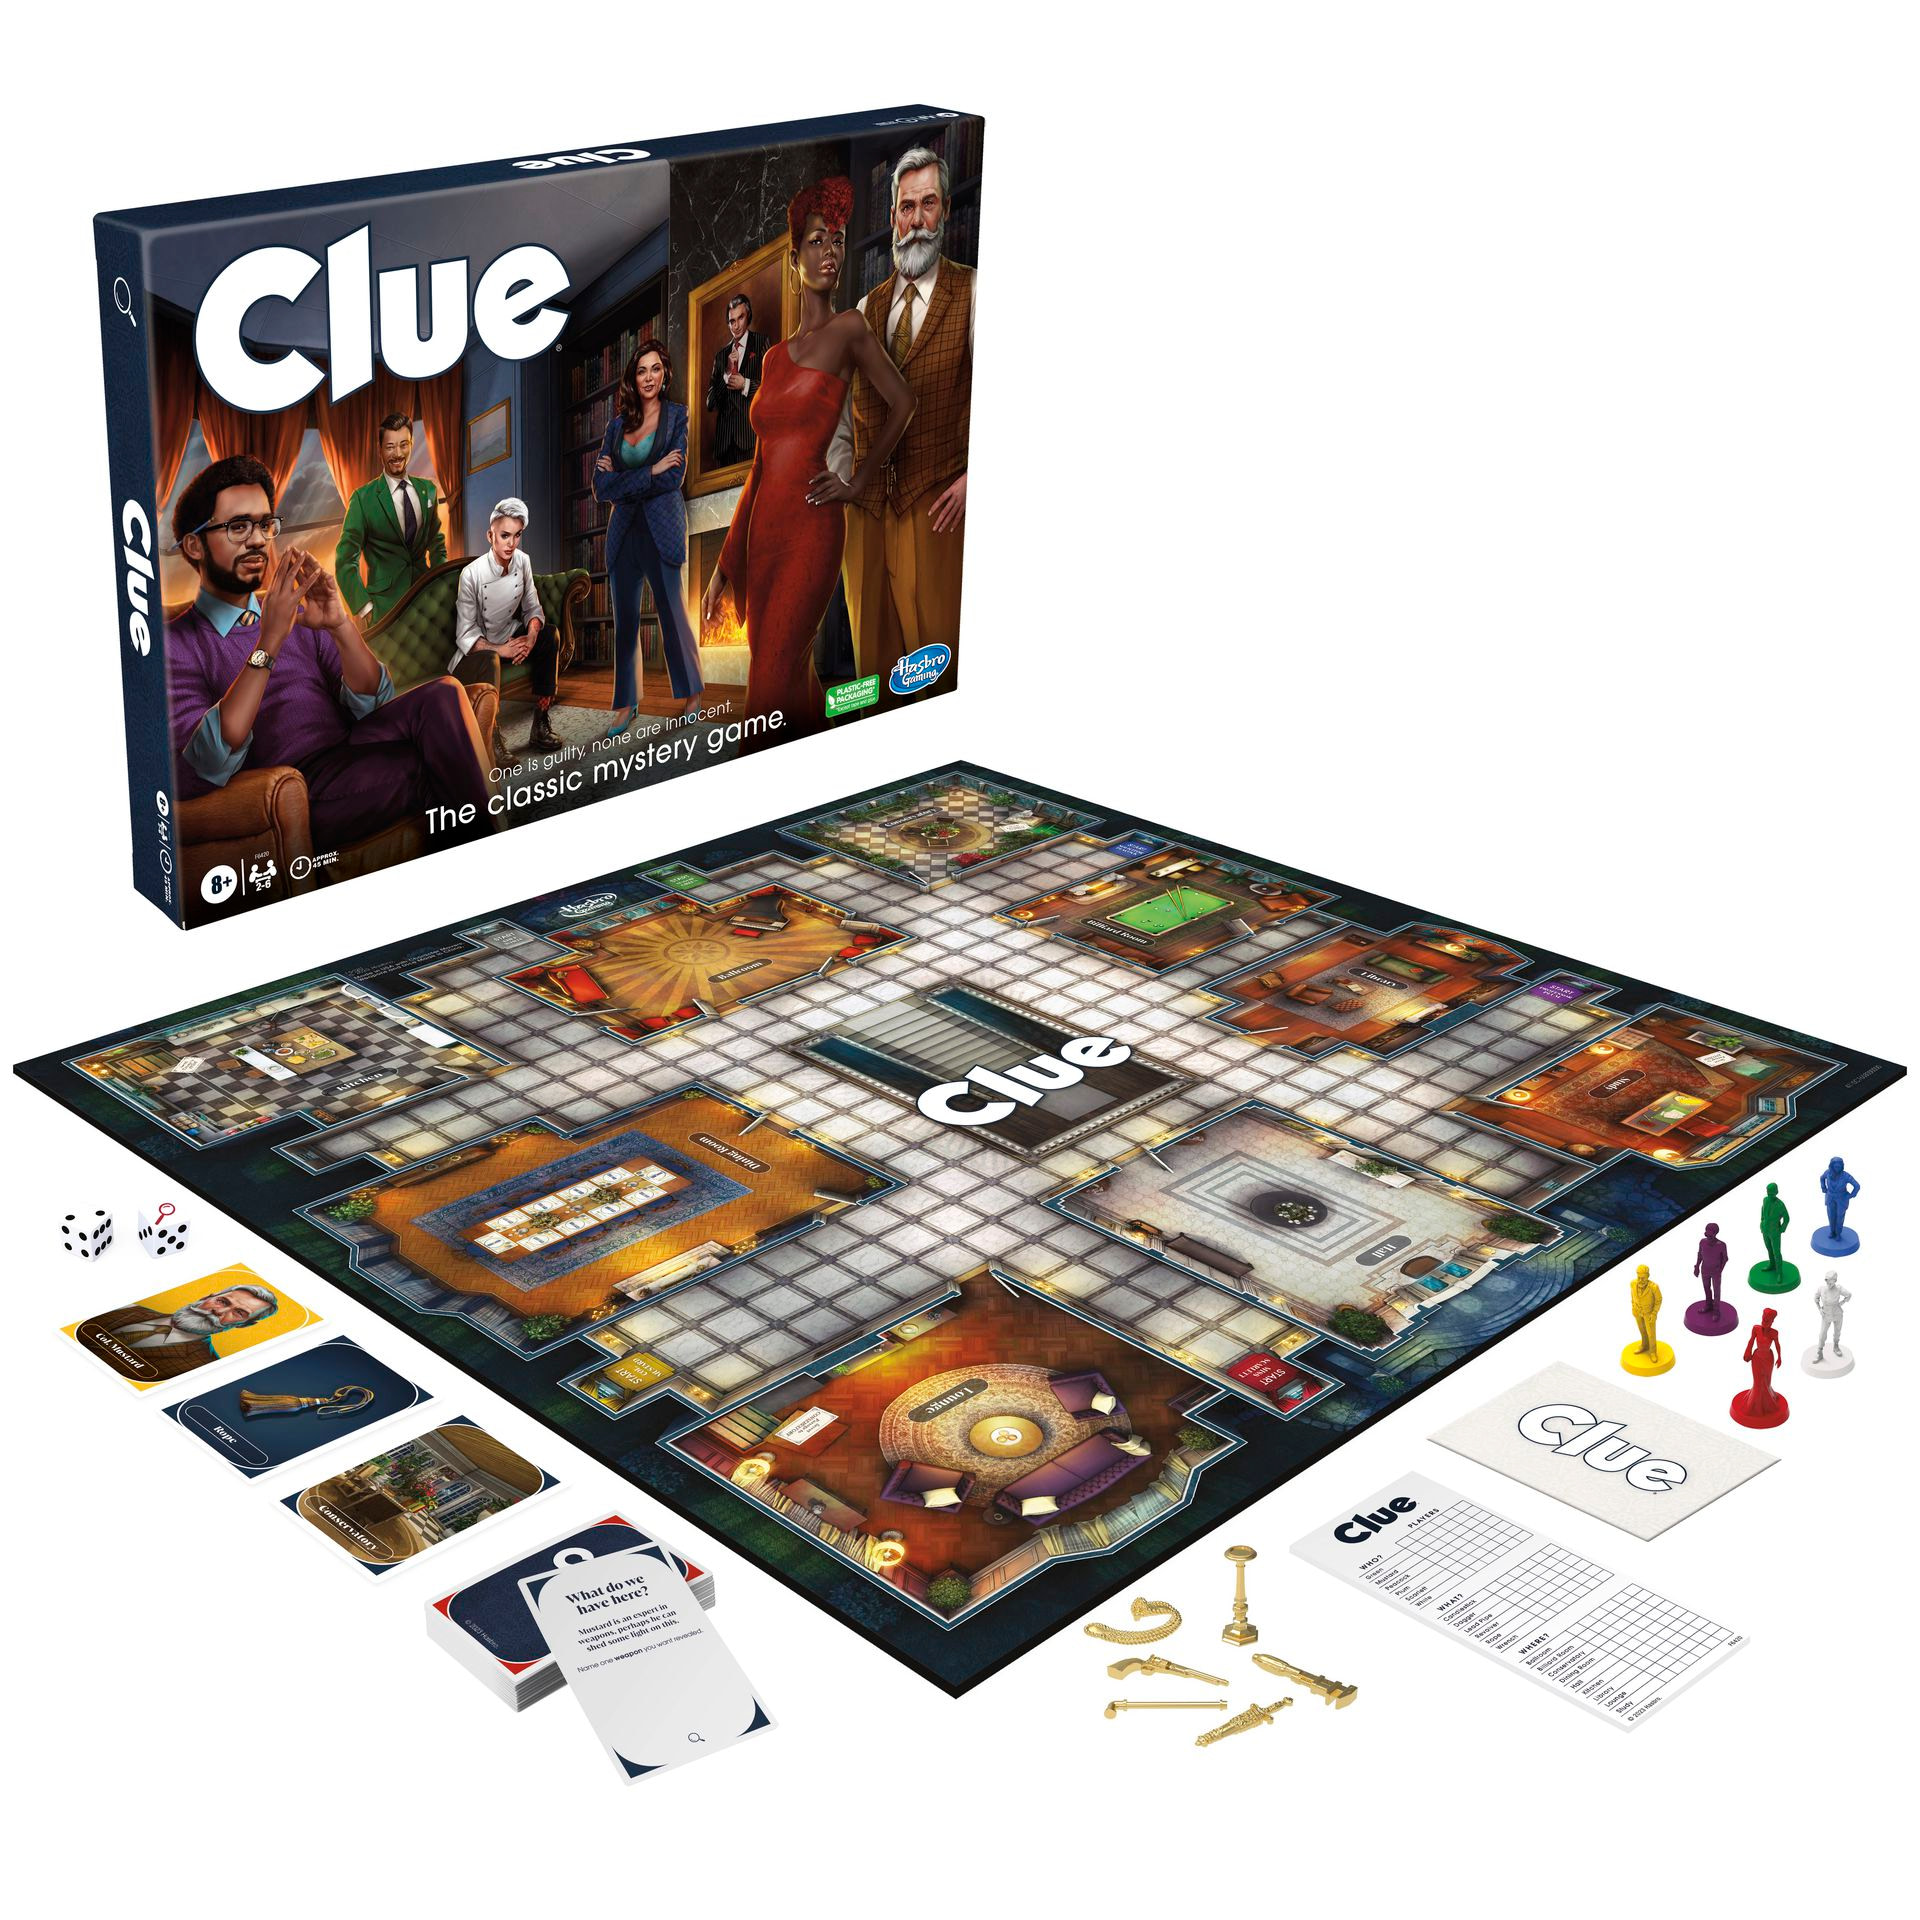 Clue has a new look for a new generation of board game fans — and it goes on sale today